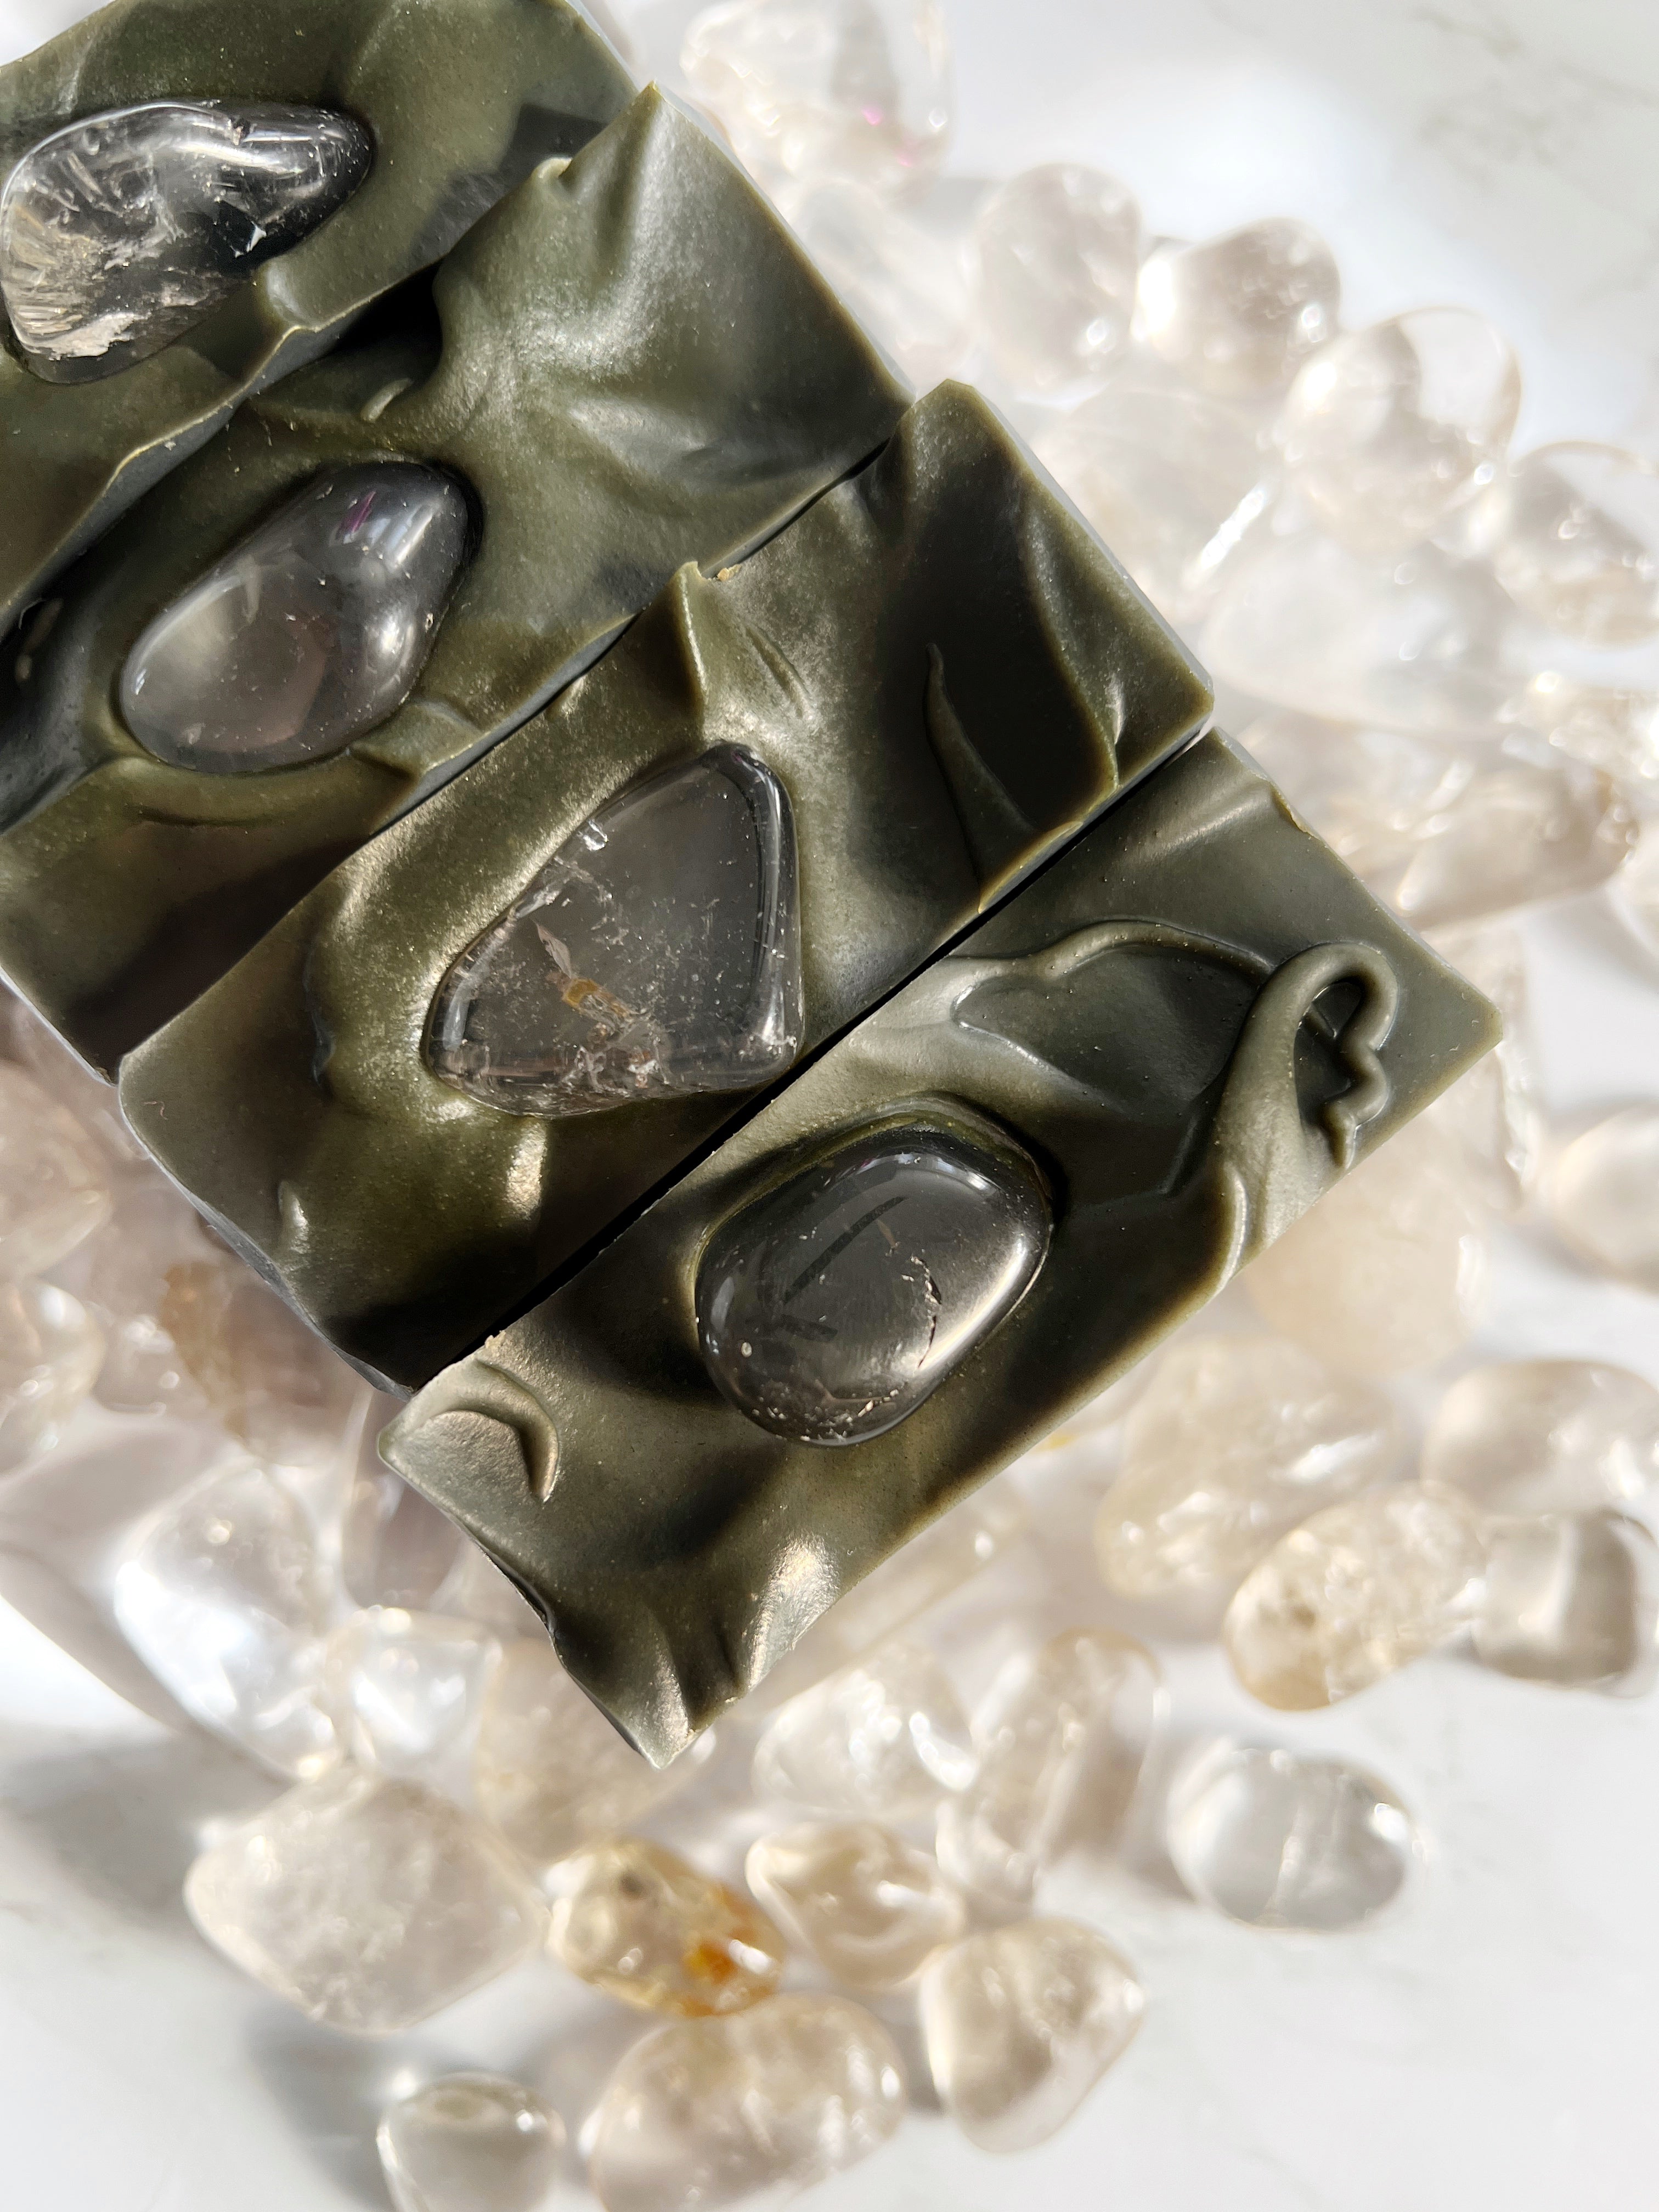 Smoky quartz crystal soap with organic and vegan ingredients